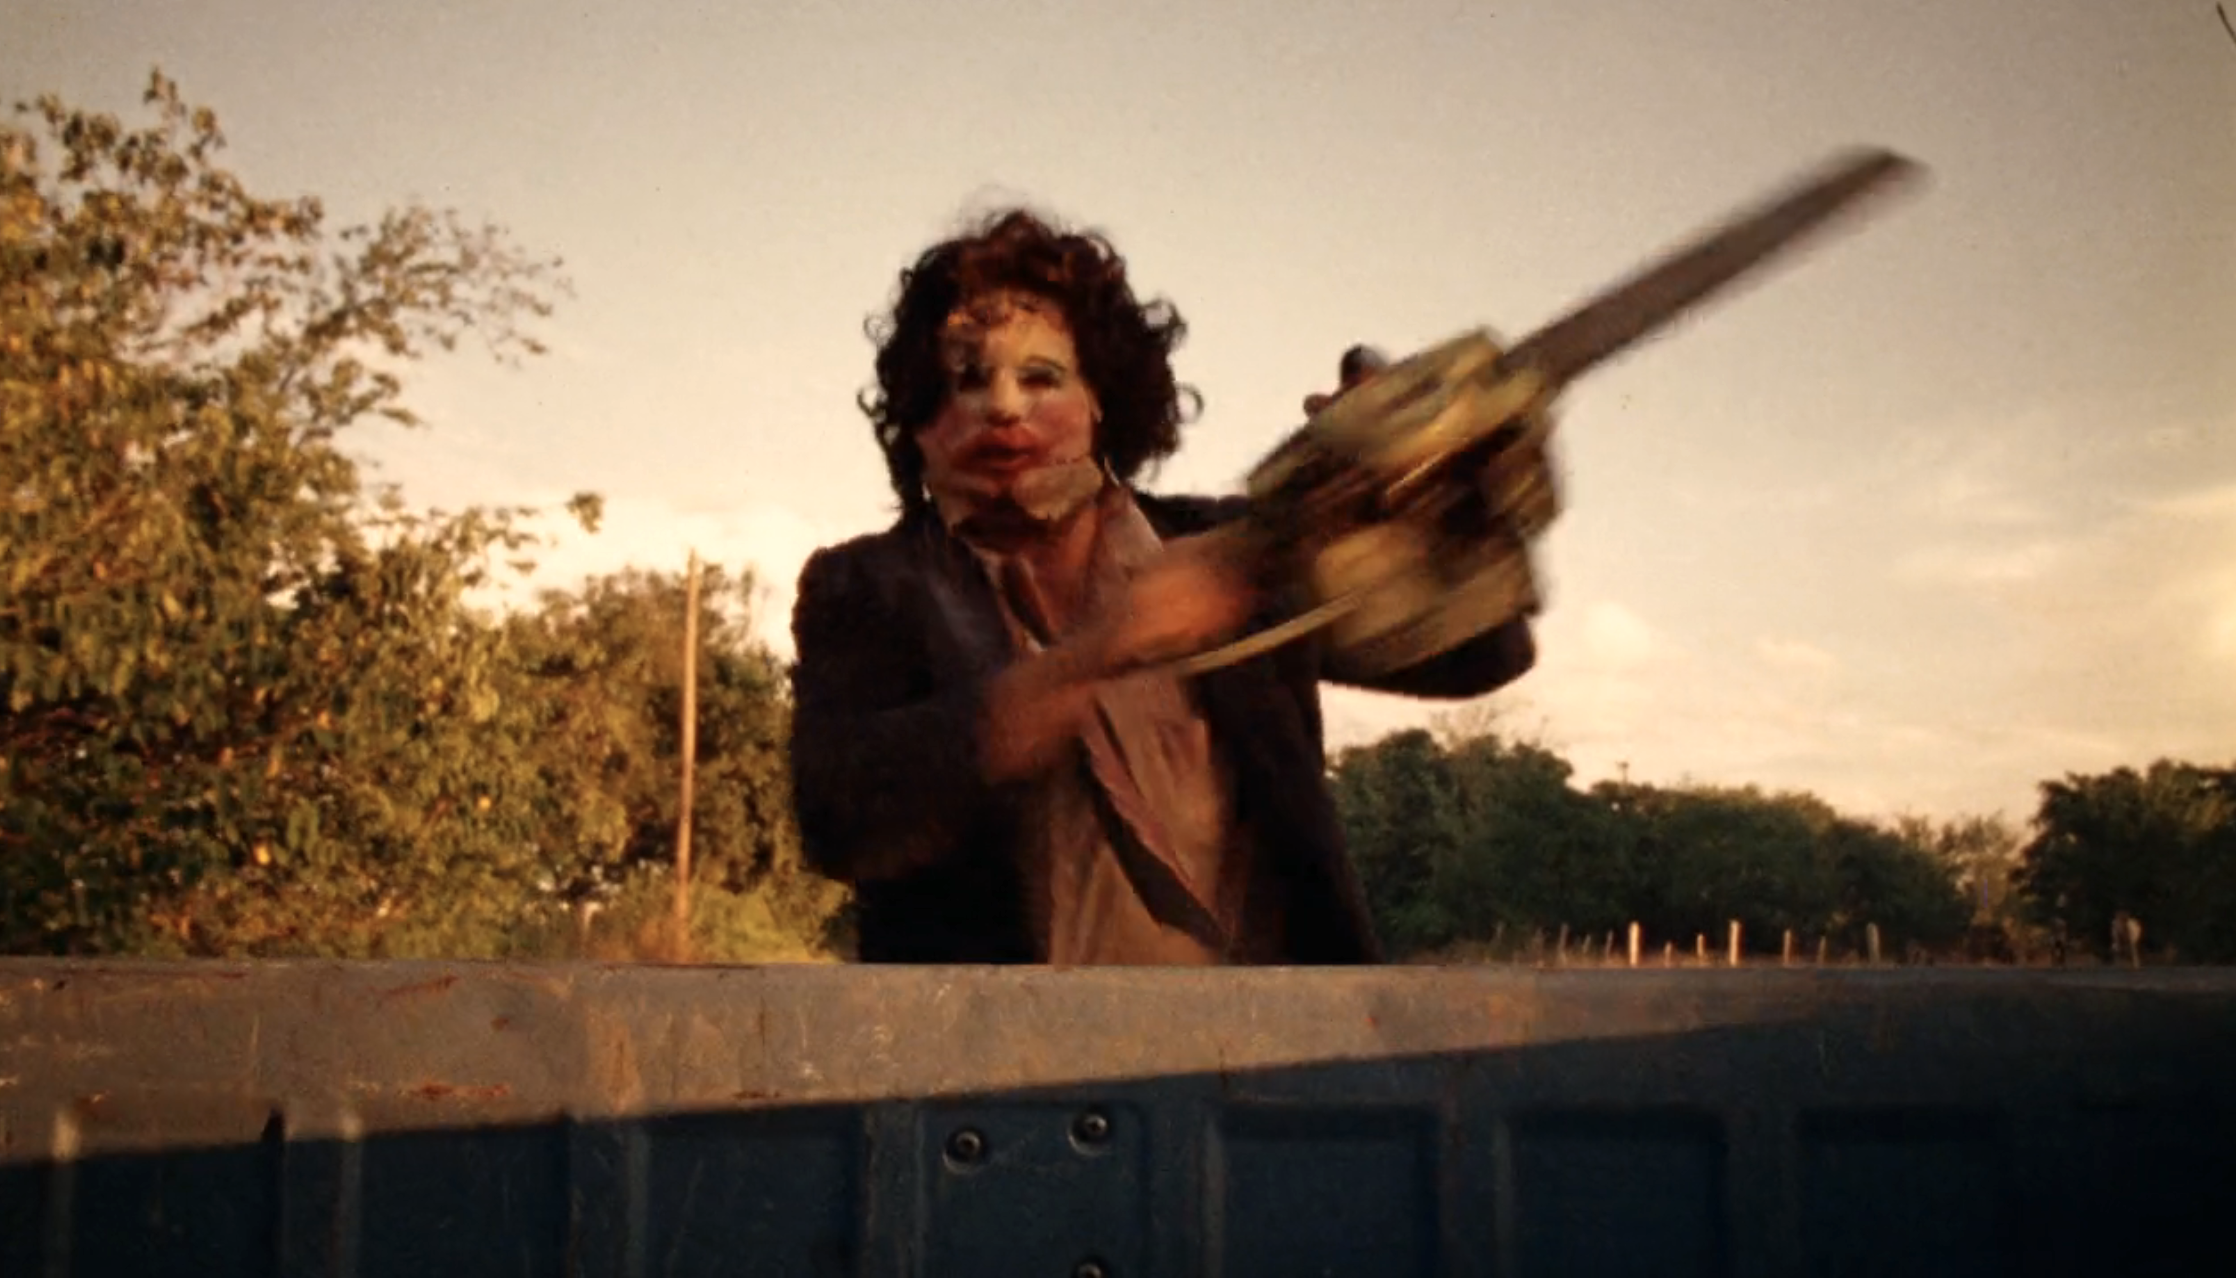 Leatherface with the chainsaw